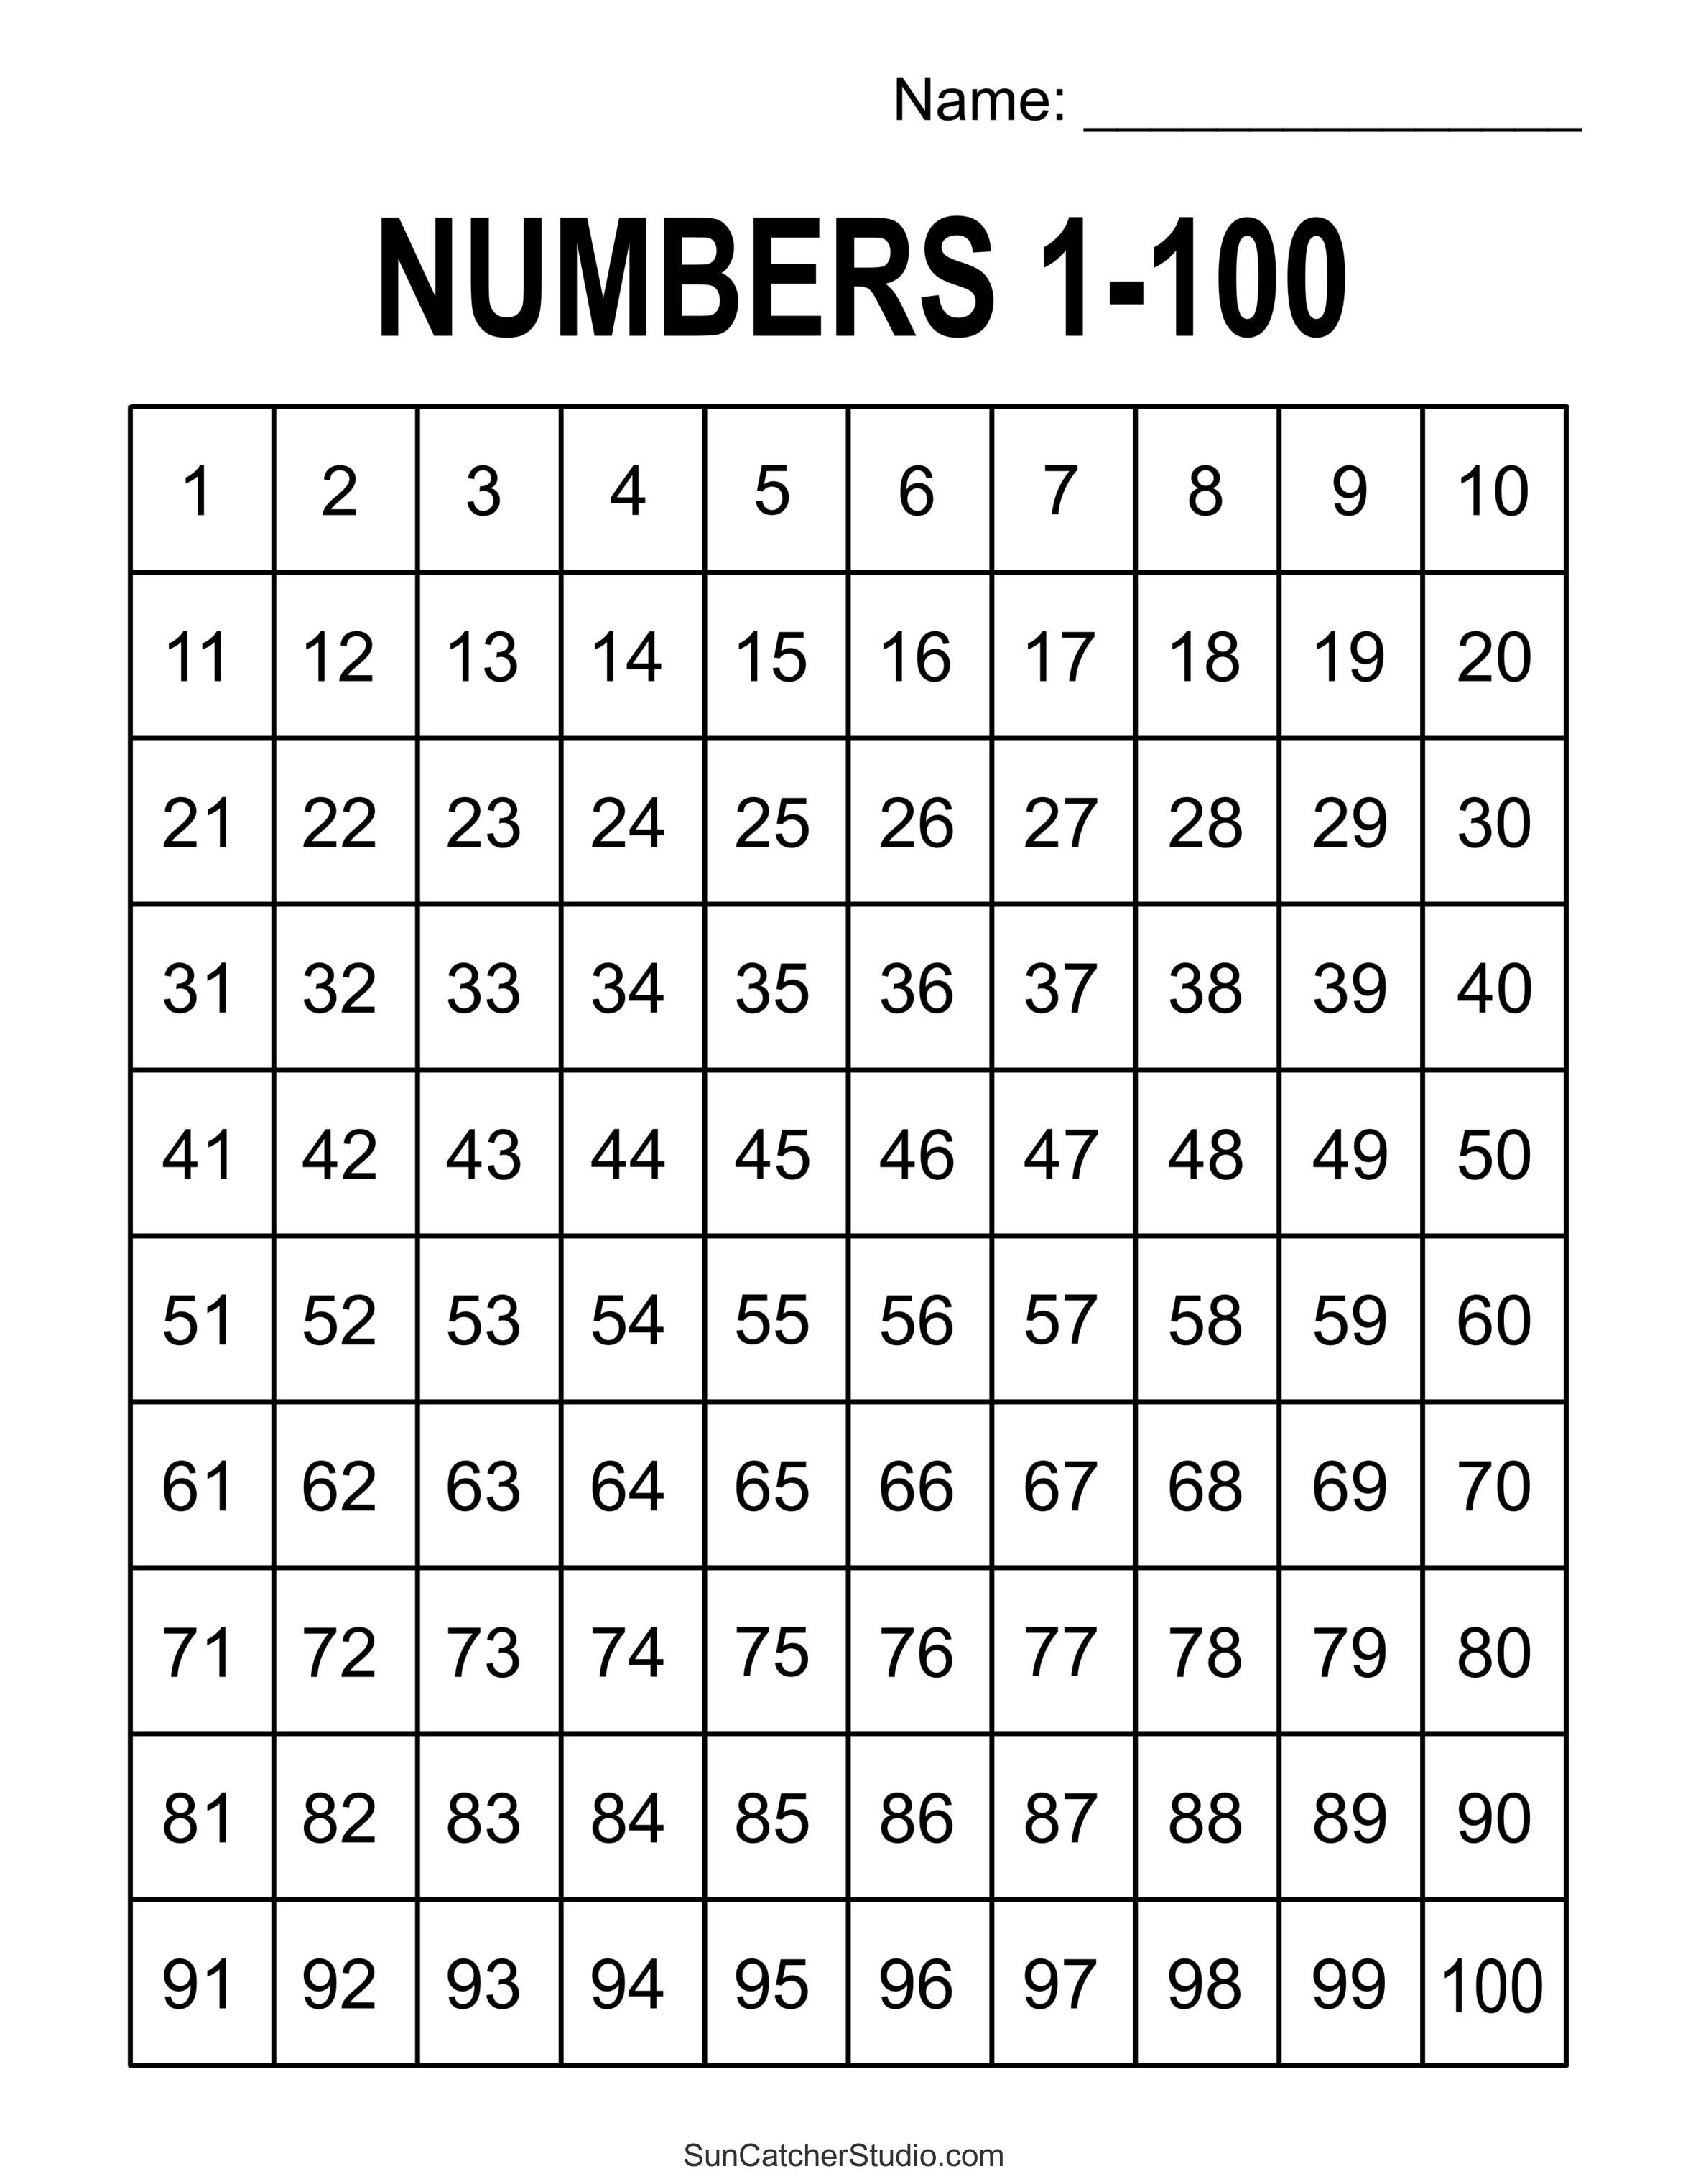 Free Printable Hundreds Charts (Numbers 1 to 100) DIY Projects